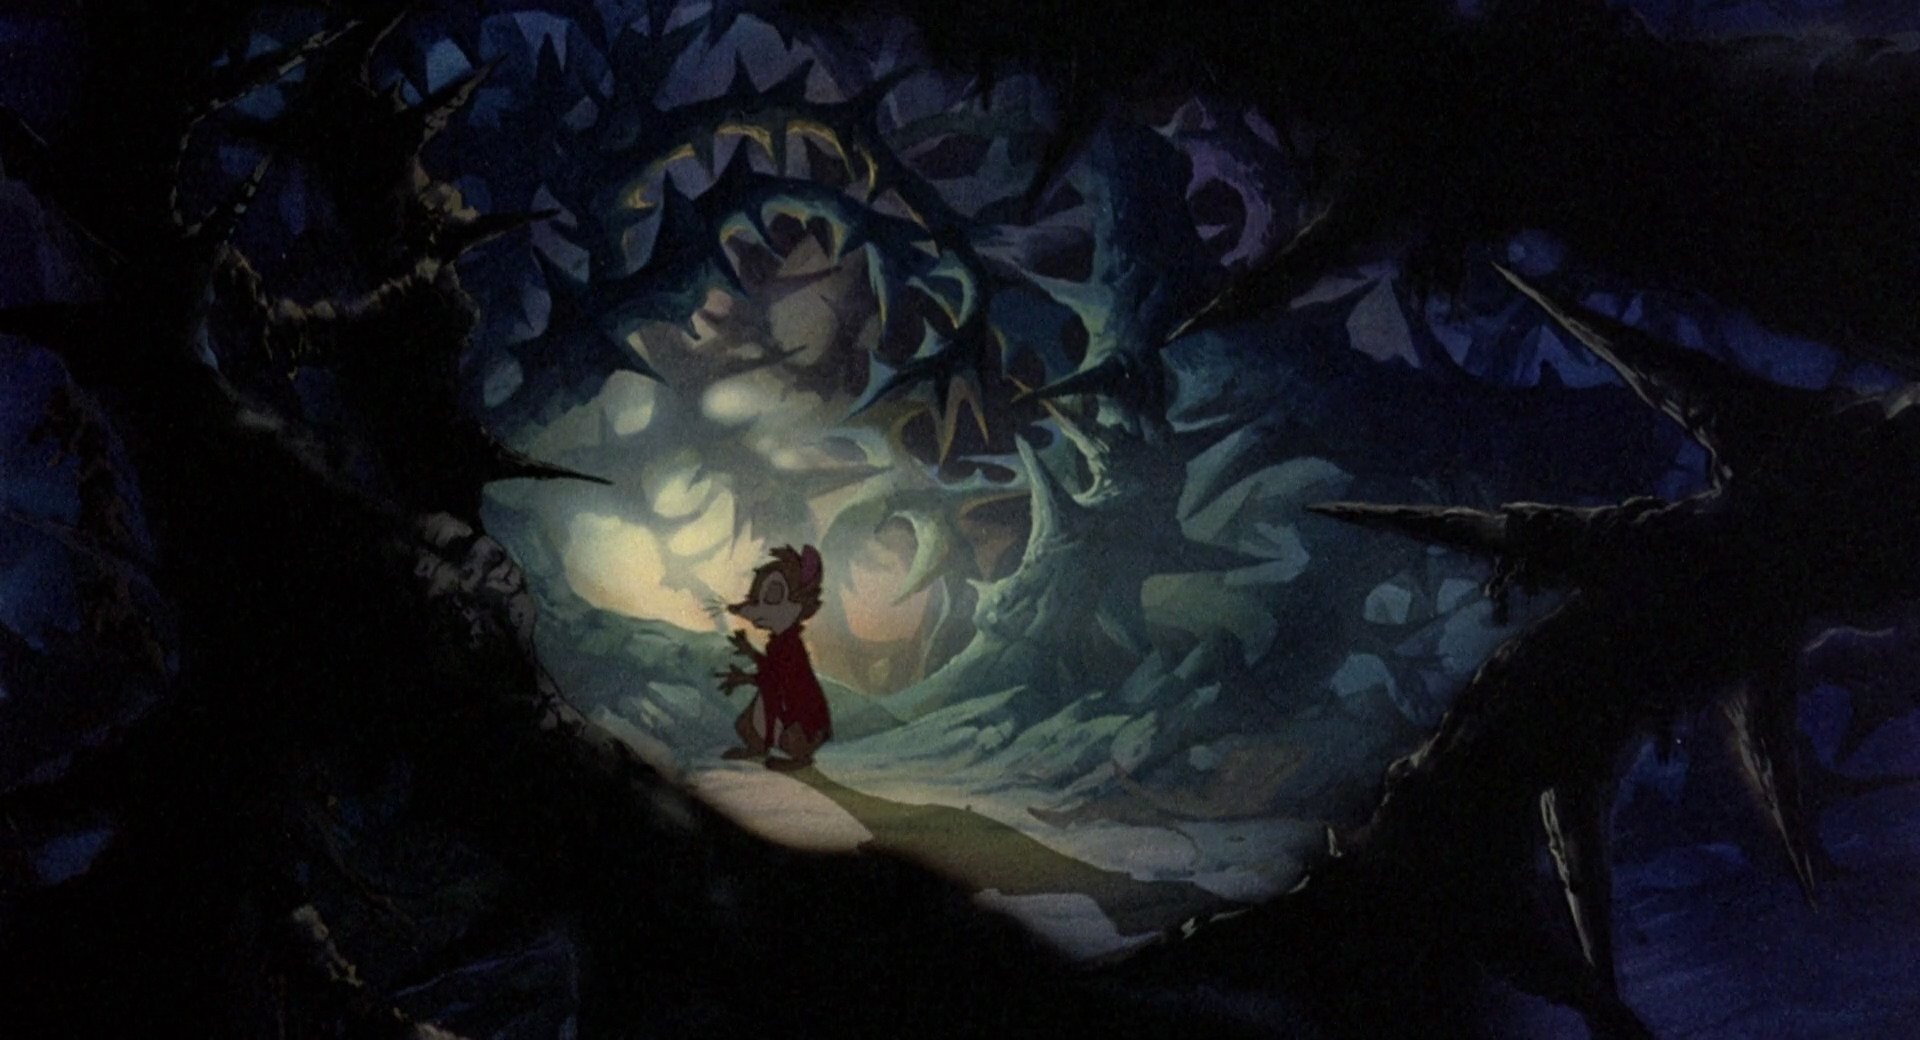 Tohad on Twitter: Backgrounds from The Secret of NIMH